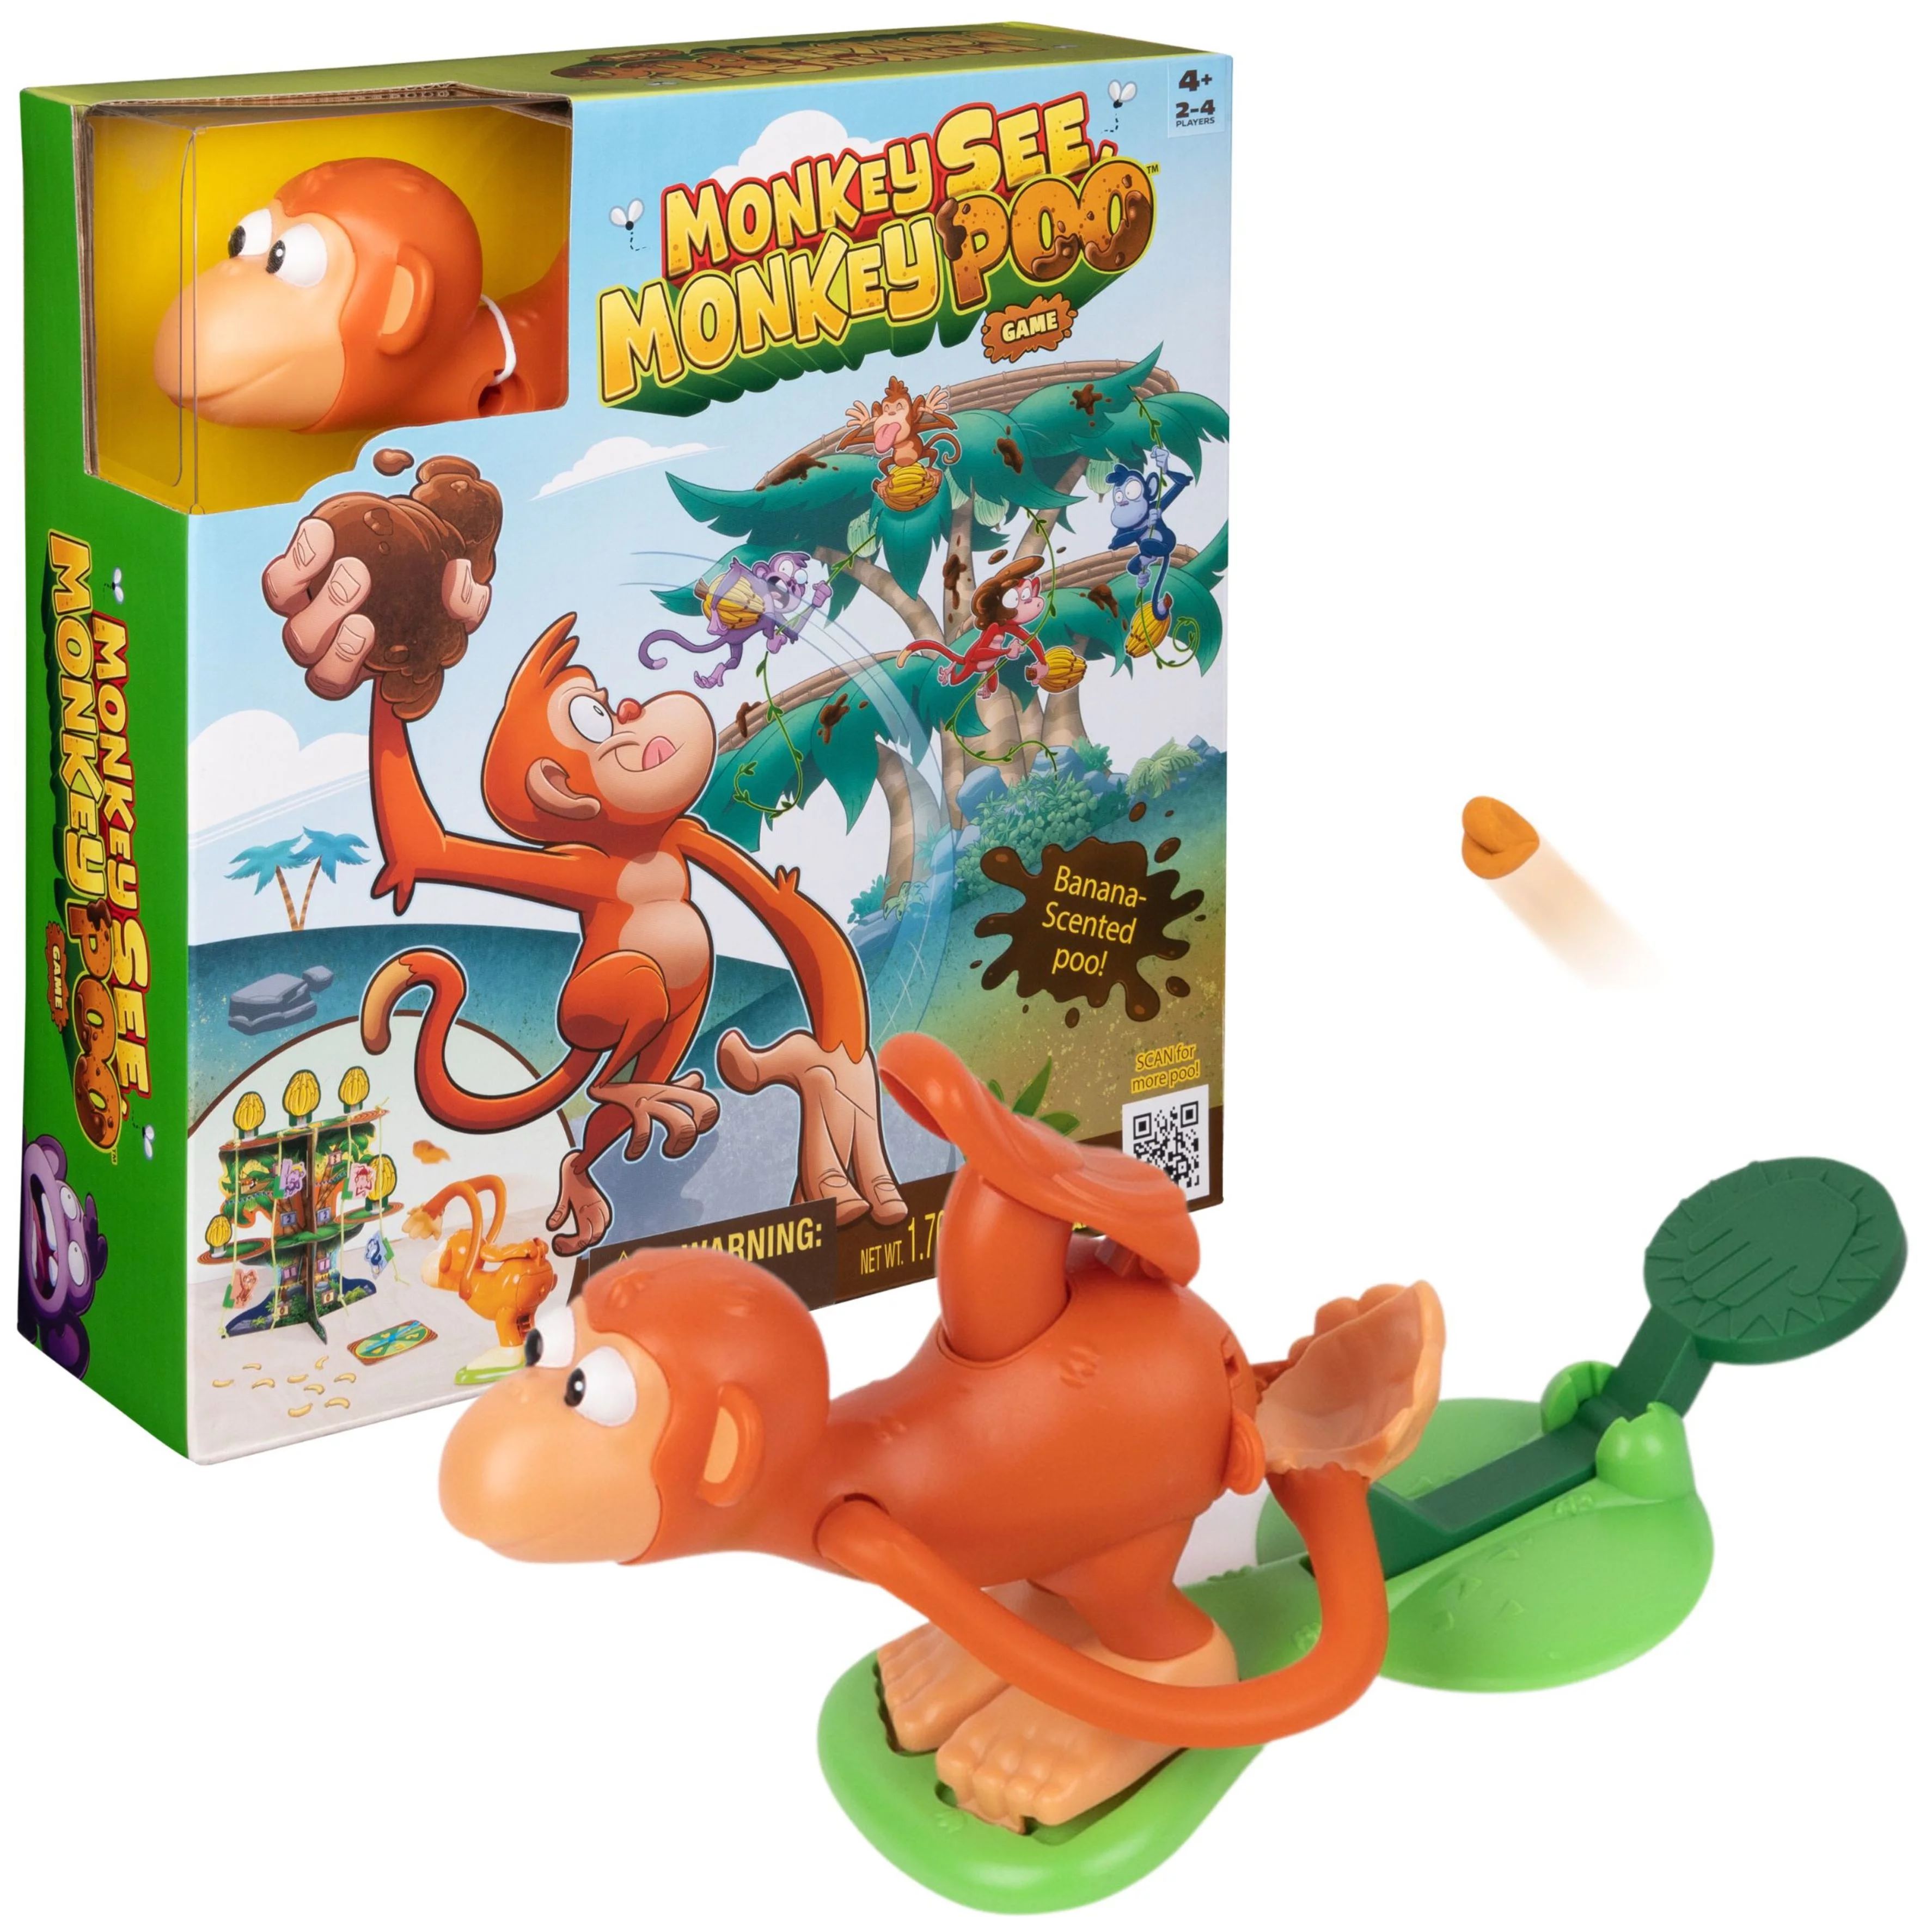 Monkey See Monkey Poo Game with Banana-Scented Fake Poop for Kids 4+ | Walmart (US)